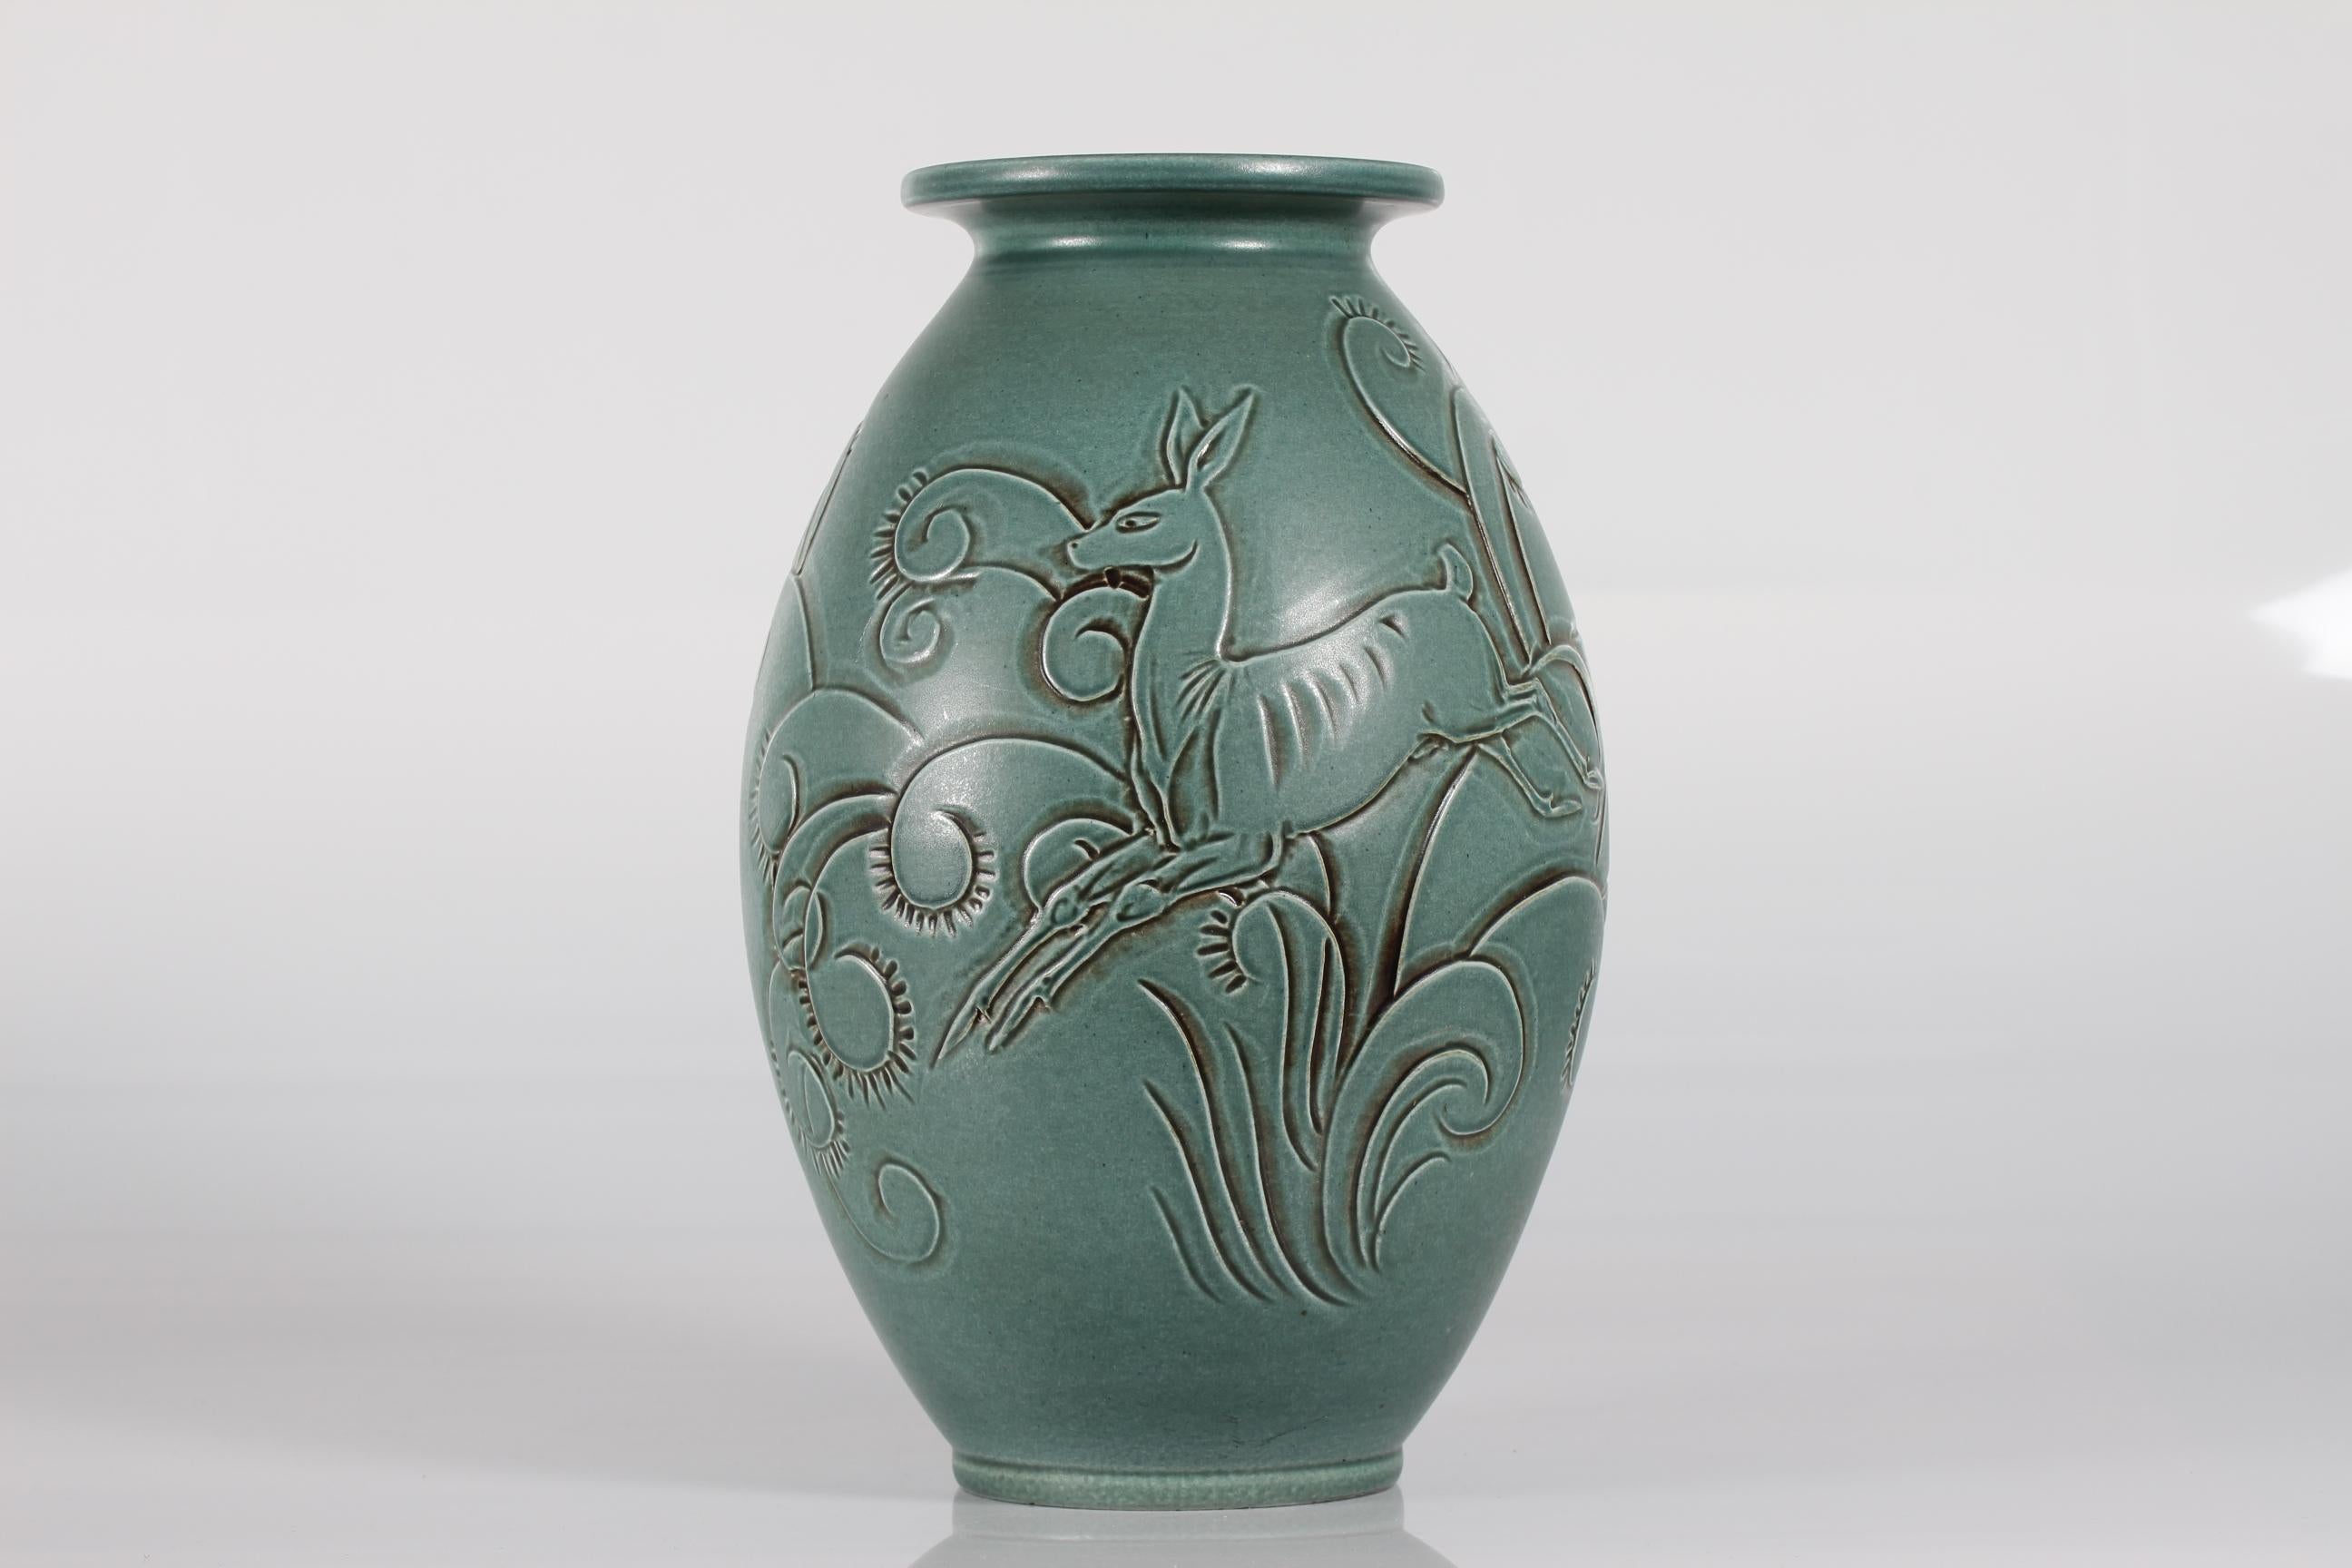 This huge Danish ceramic floor vase is designed by Aksel Sigvald Nielsen (1910-1989) signed as AKSINI, and made by Knabstrup ceramic in the middle of the 20th century.

The vase has a green satin glaze and a young deer and plant ornaments as a